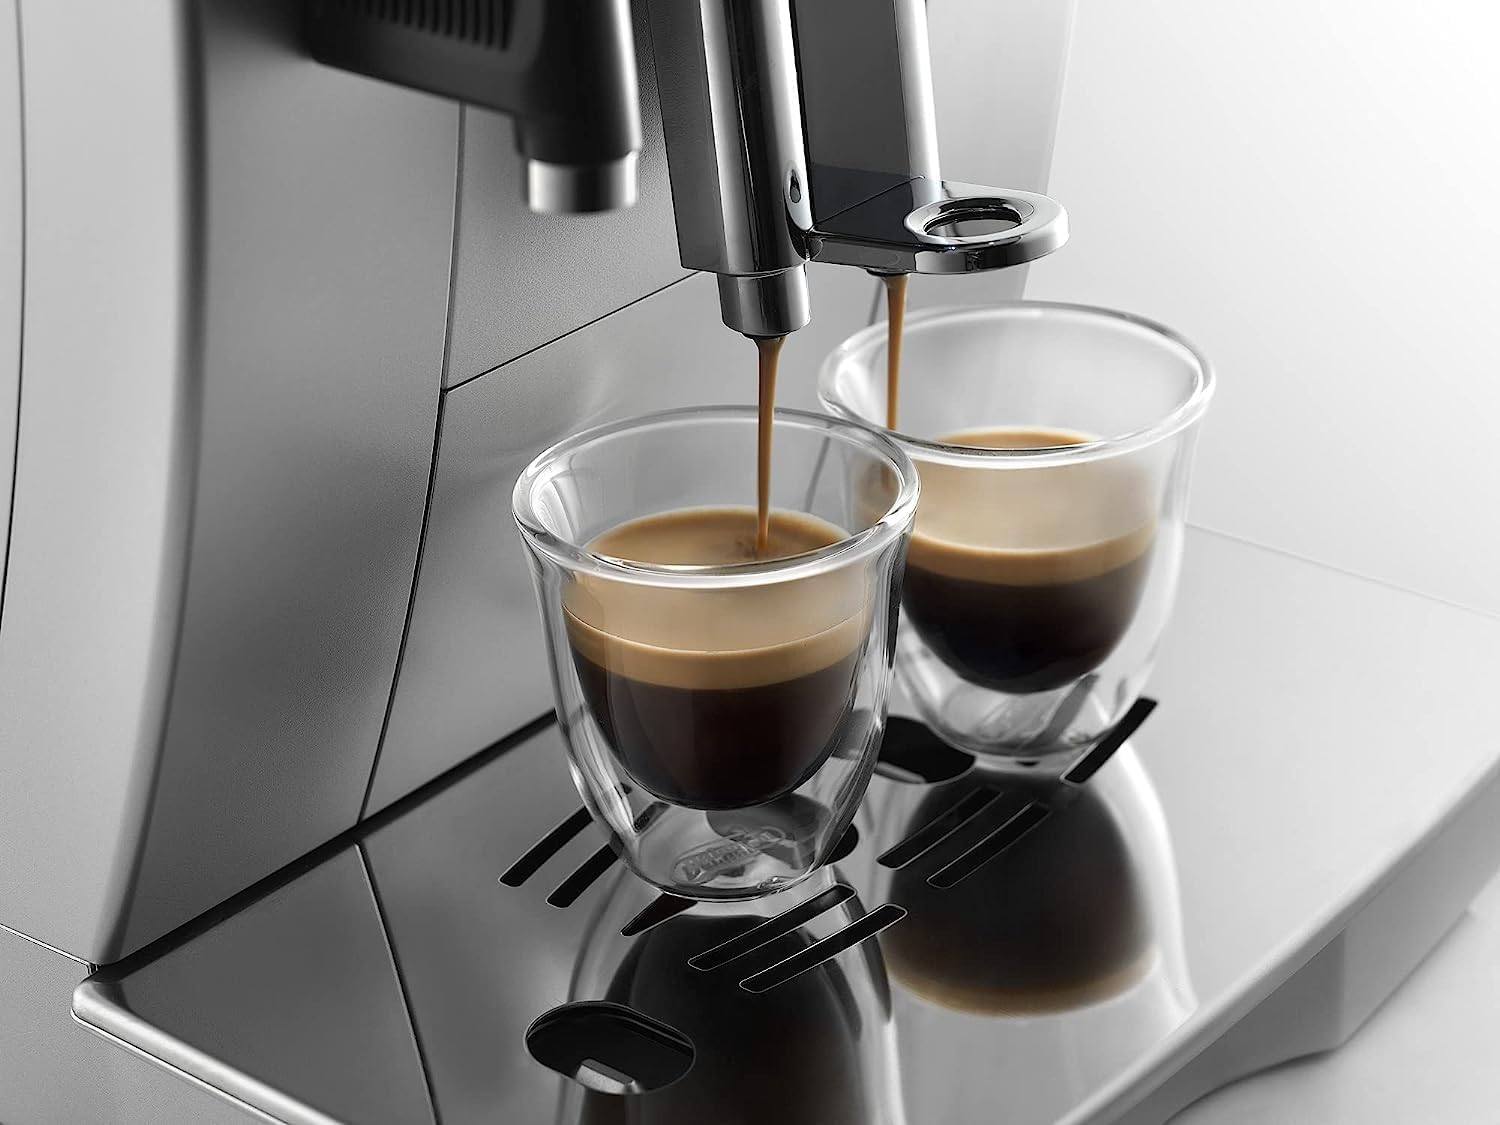 DeLonghi DeLonghi Double Walled Thermo Espresso Glasses, Set of 2, Regular, Clear, 90 milliliters